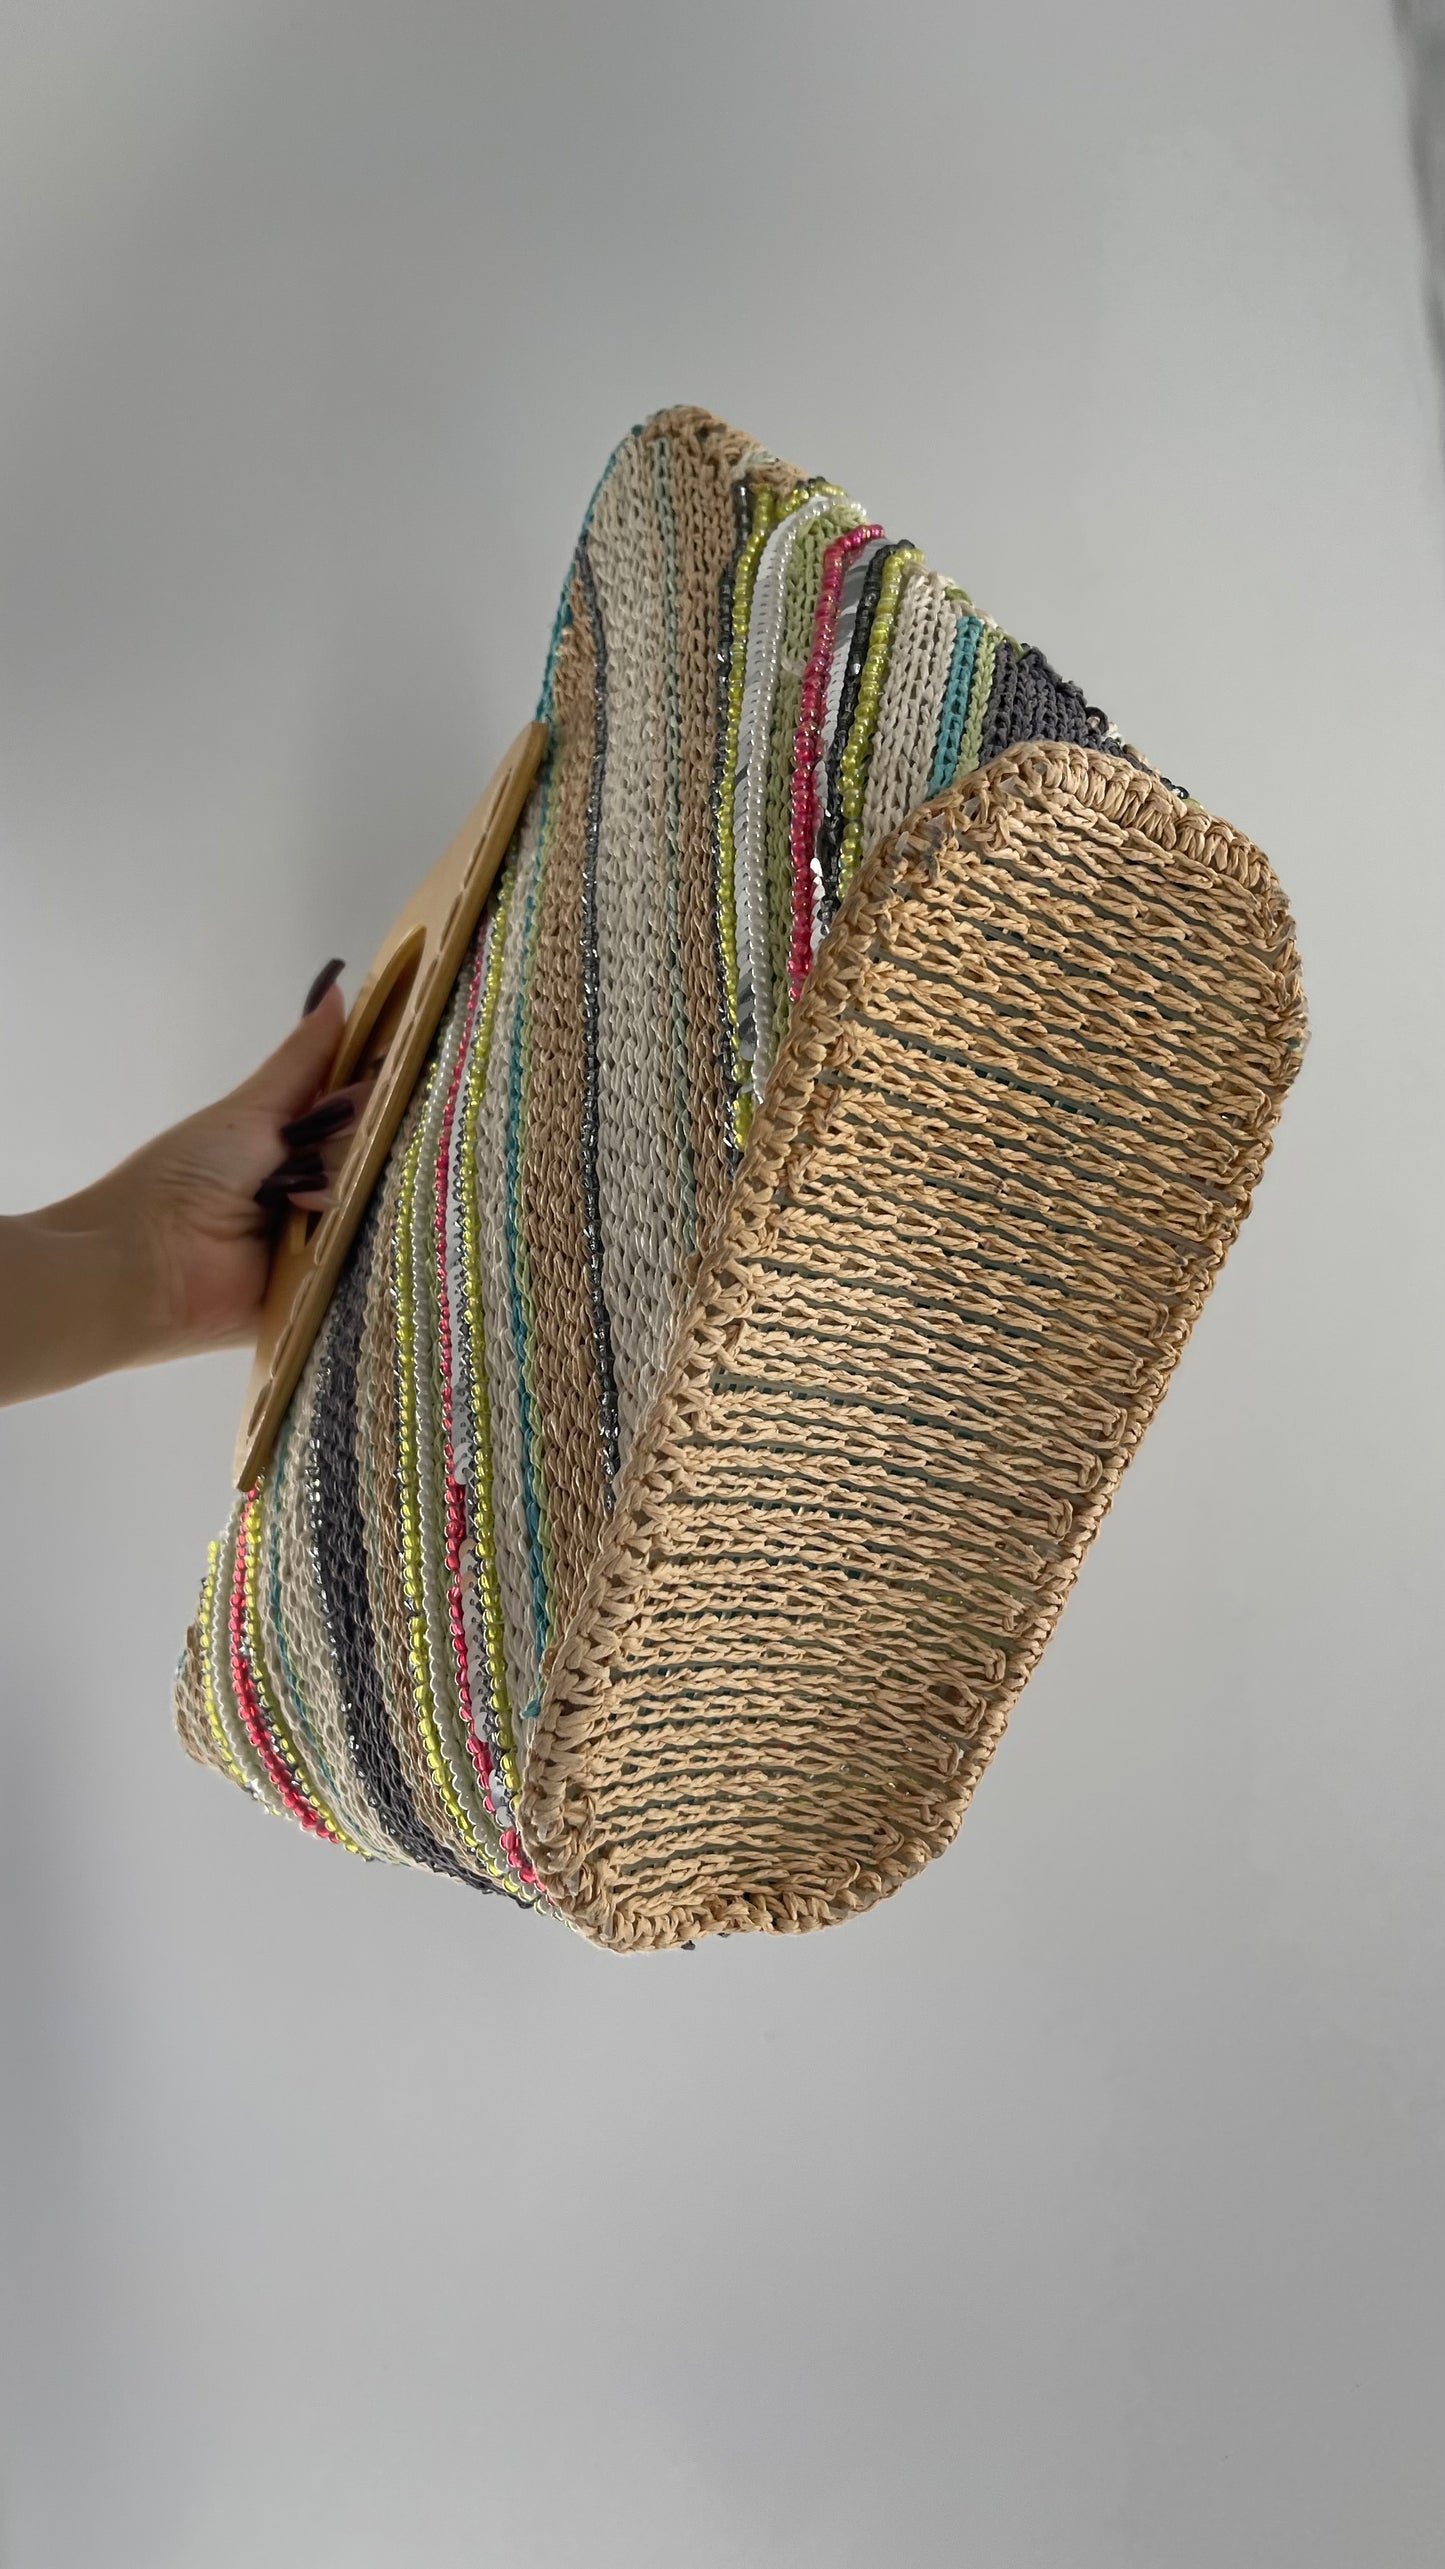 Vintage Woven Straw Purse with Sequins and Beaded Details